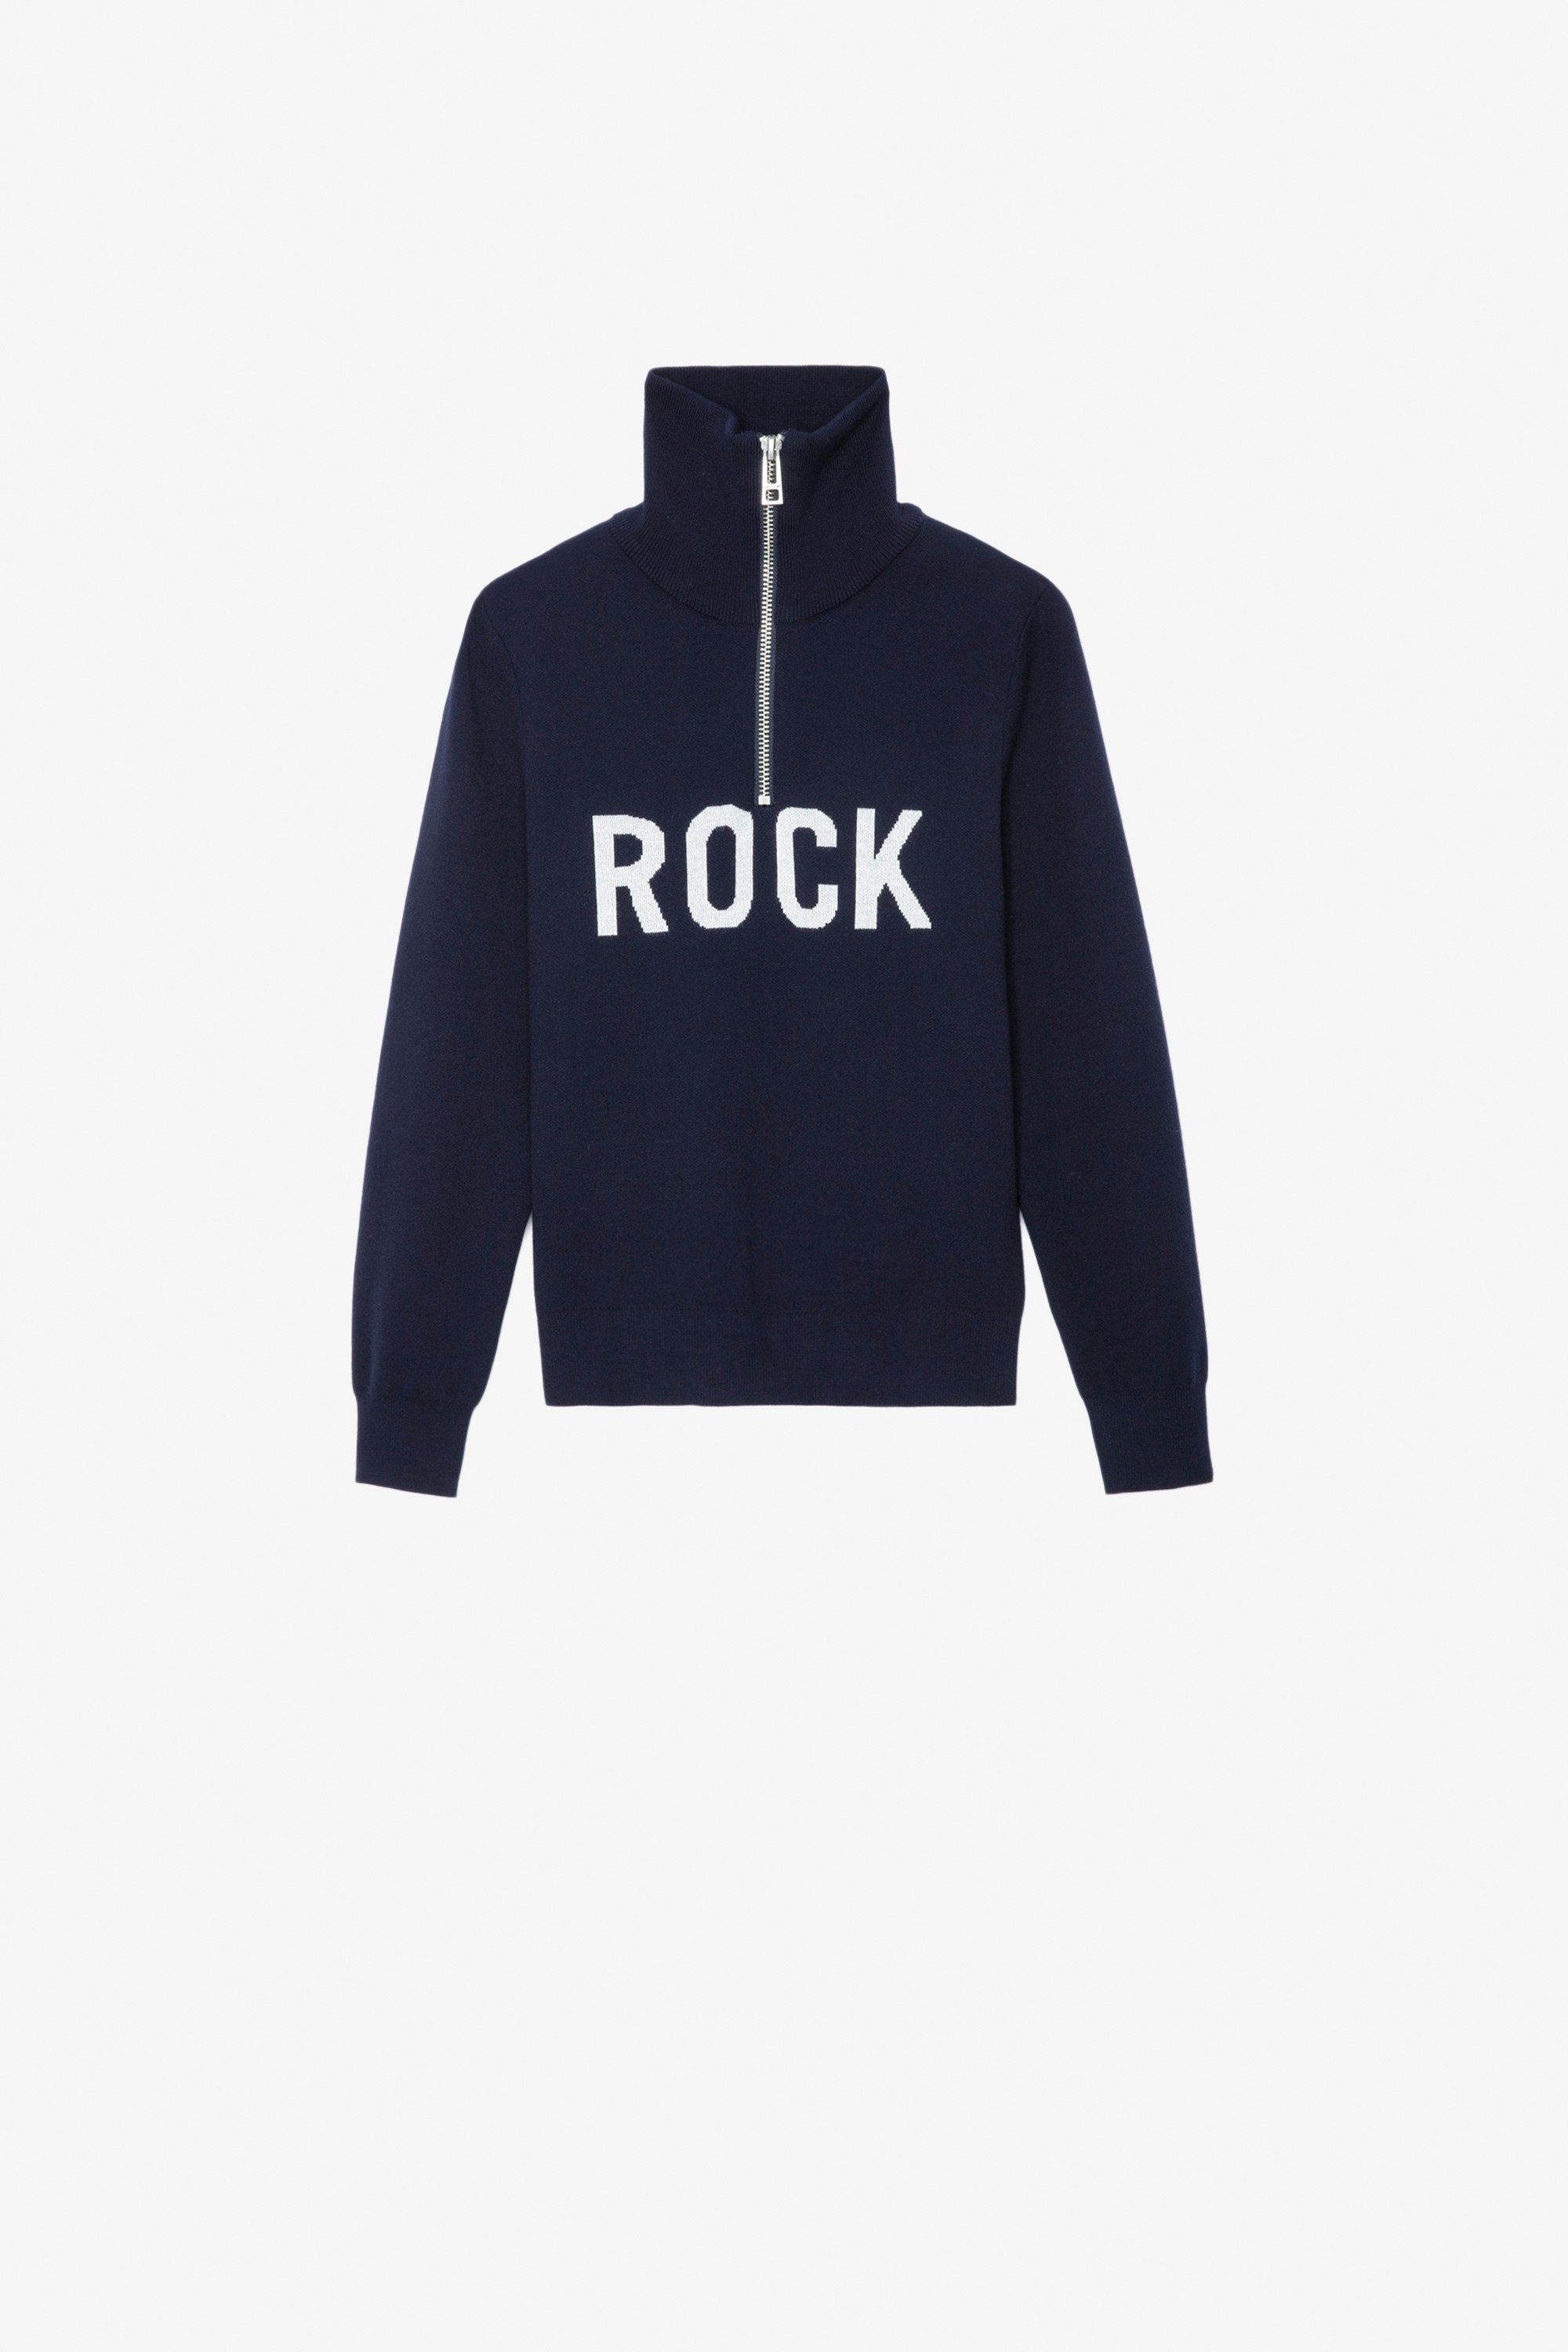 Tim Boys’ Jumper - Boys’ navy blue knit sweater with zip neck and “Rock” slogan.